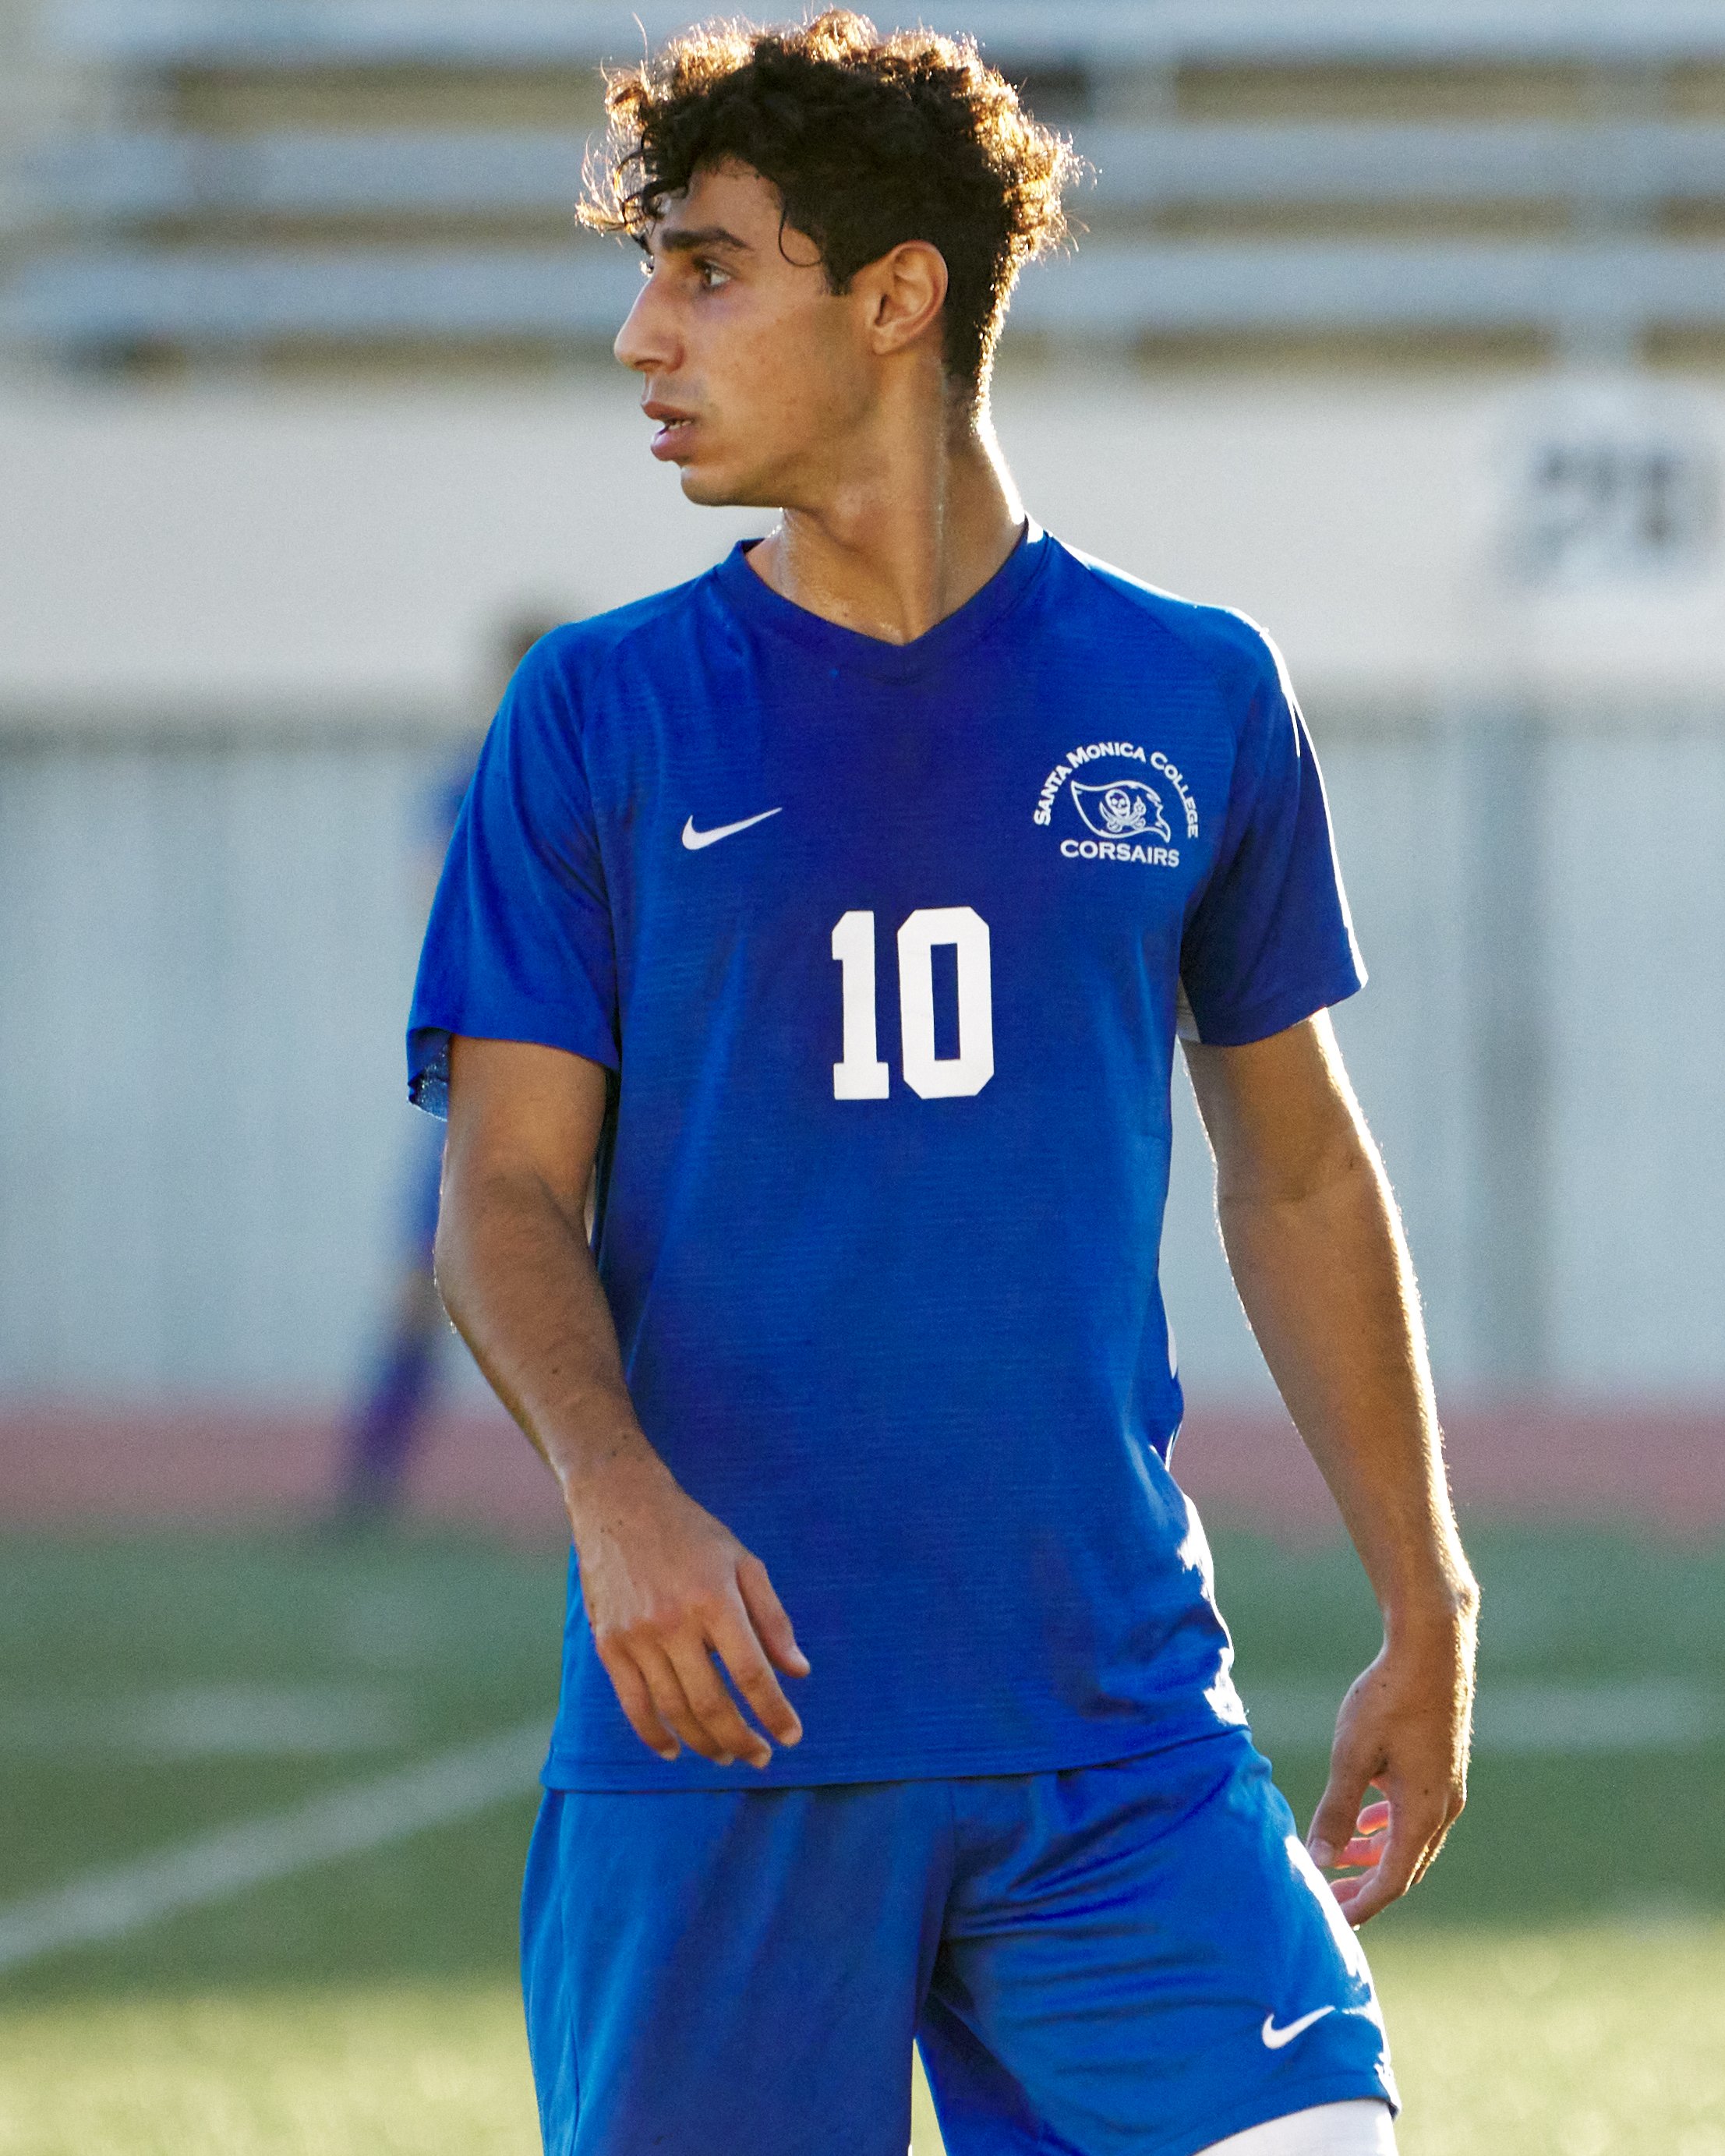  Santa Monica College Corsairs' Roey Kivity during the men's soccer match against the Moorpark College Raiders on Tuesday, Oct. 25, 2022, at Corsair Field in Santa Monica, Calif. The Corsairs won 4-0. (Nicholas McCall | The Corsair) 